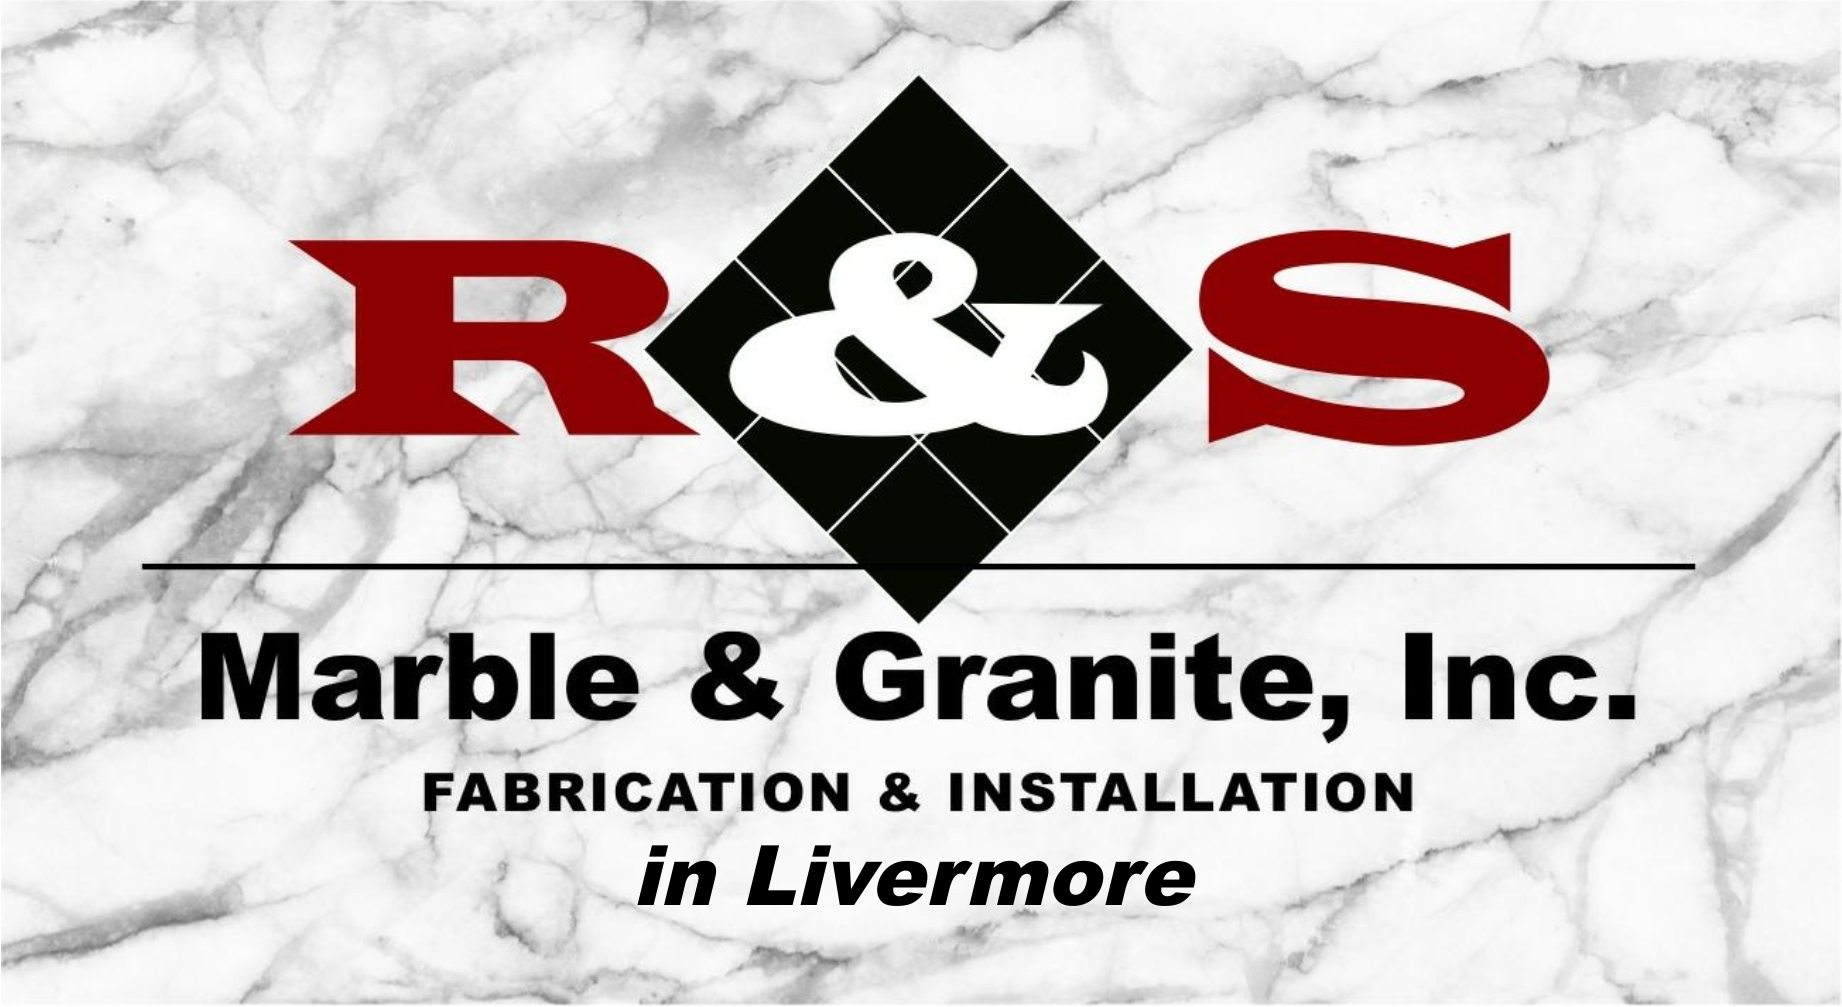 R&S Marble